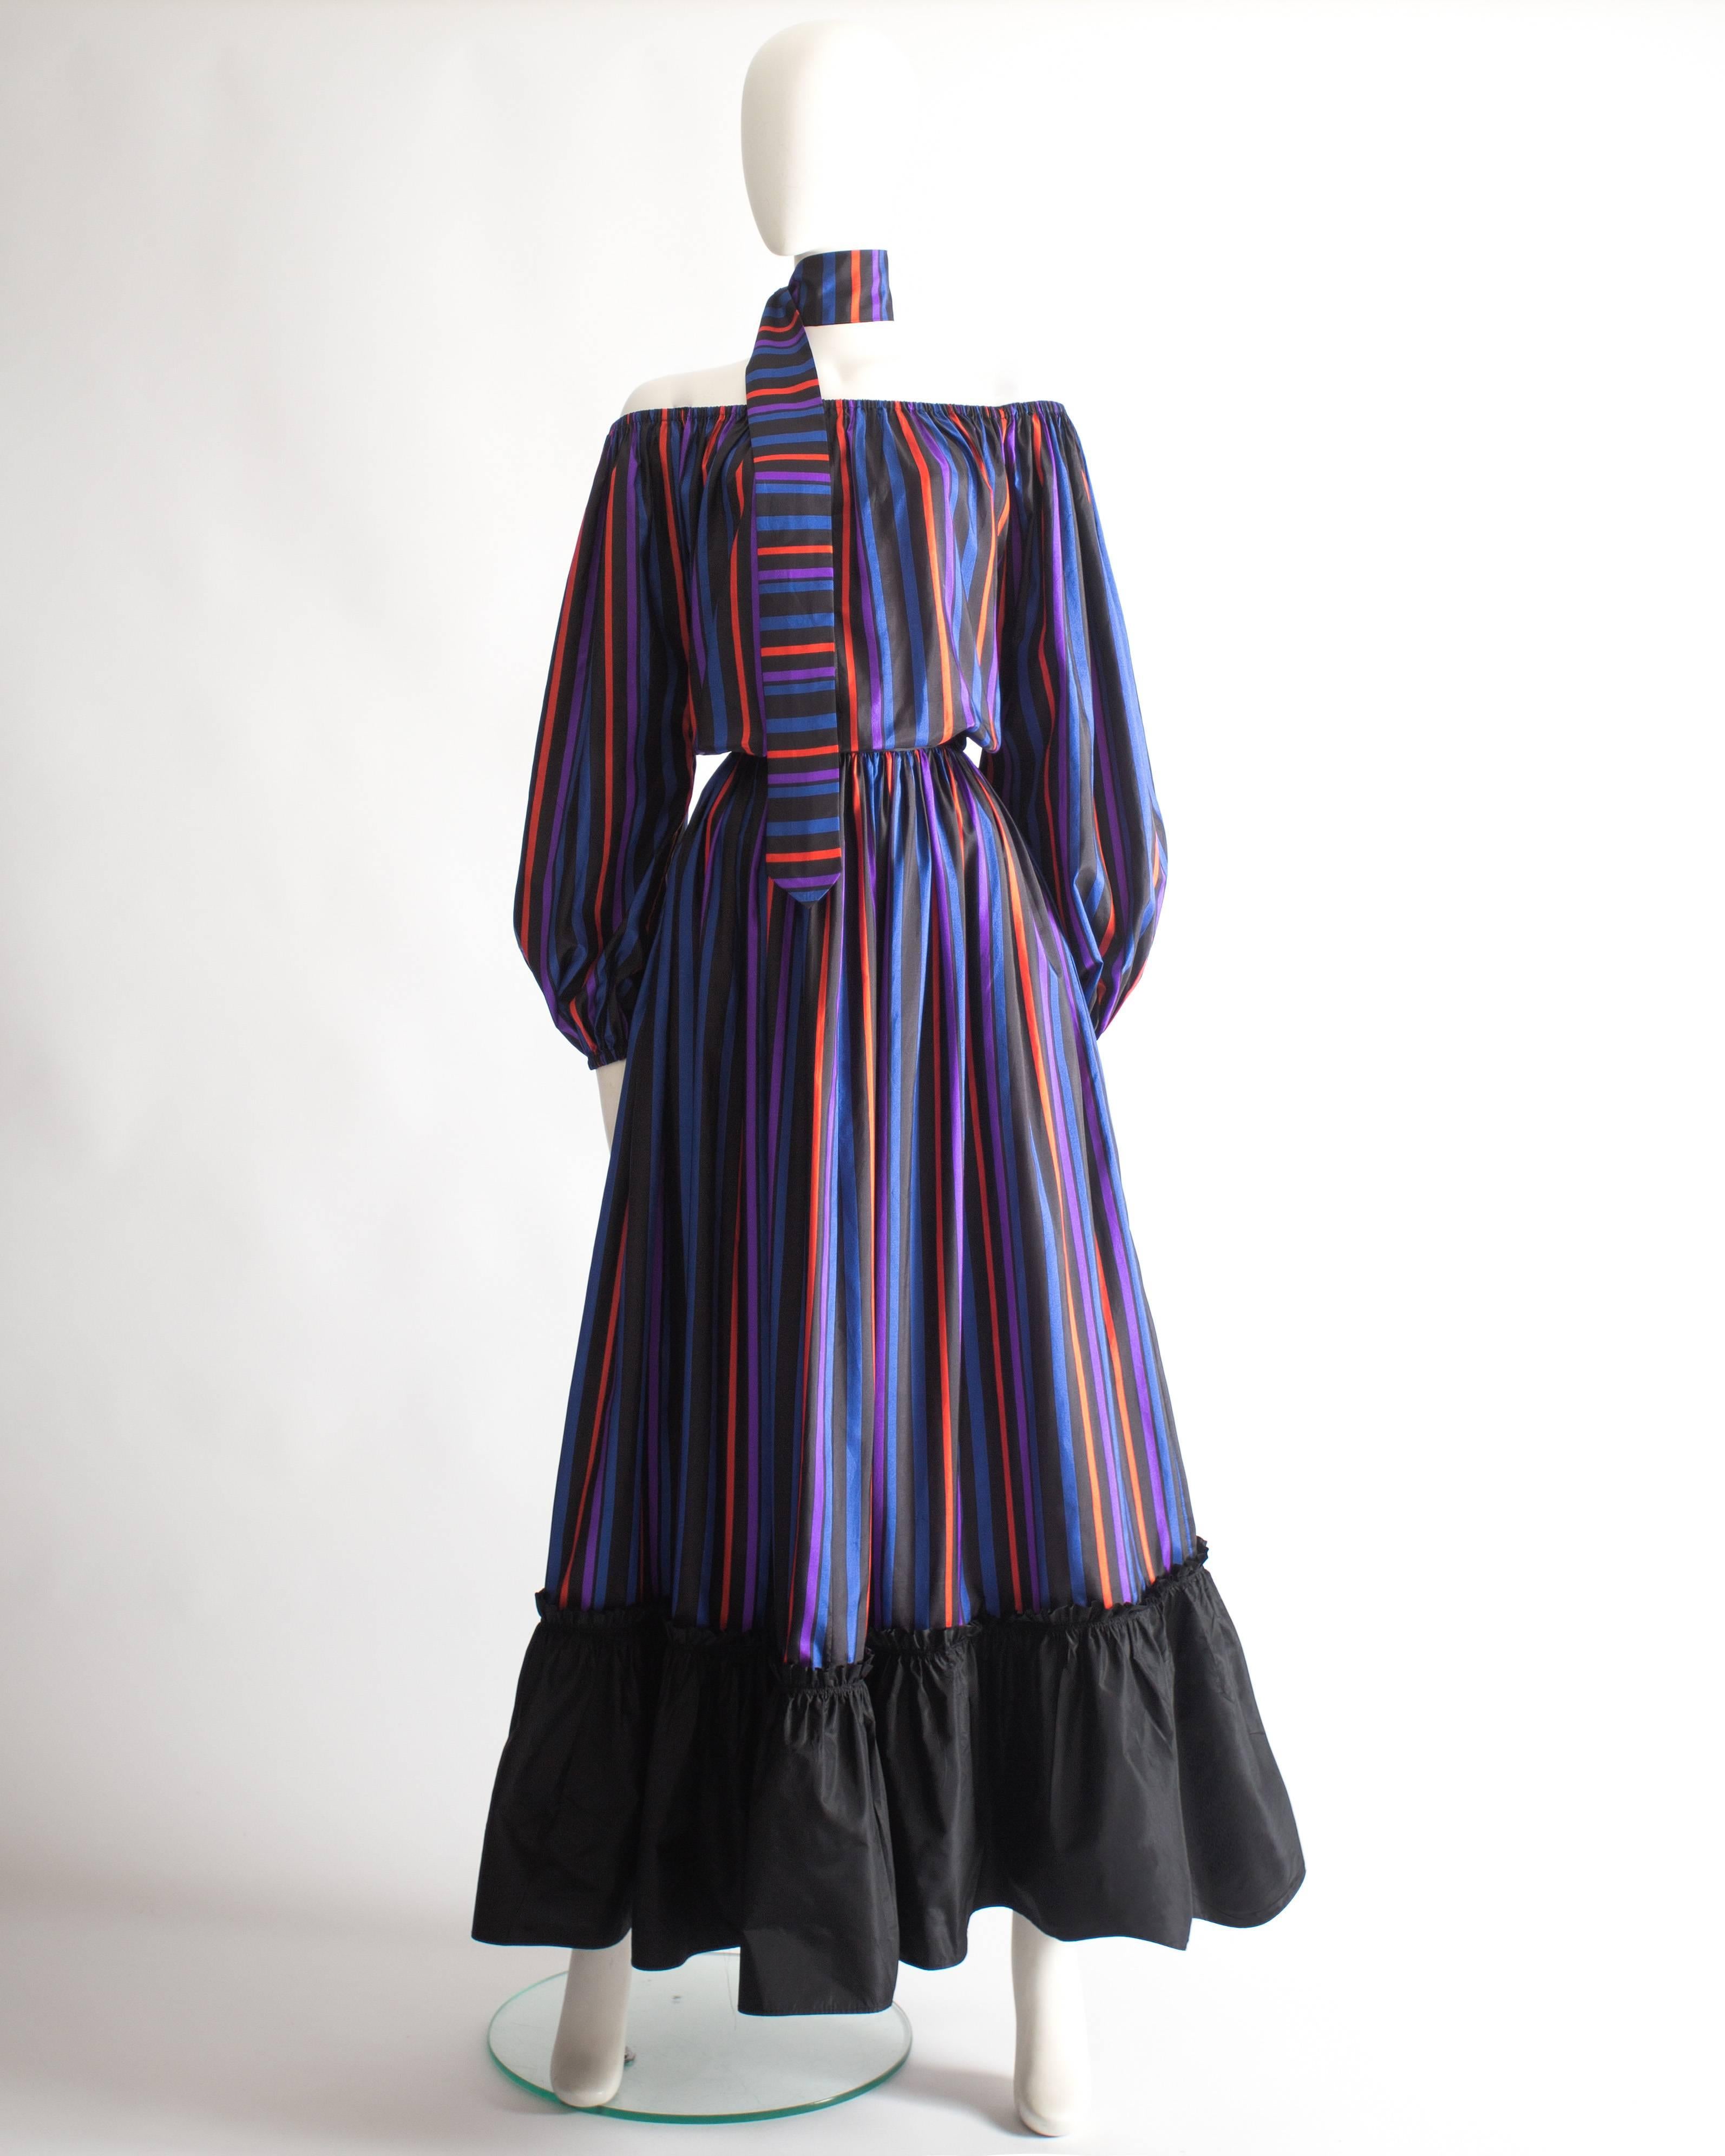 Lanvin Haute Couture evening dress, circa 1976. Striped pattern in blue, purple, red and black, elasticated cuffs and collar, off-the-shoulder design, two open pockets on the side seams, matching scarf and zip closure at the back. 

